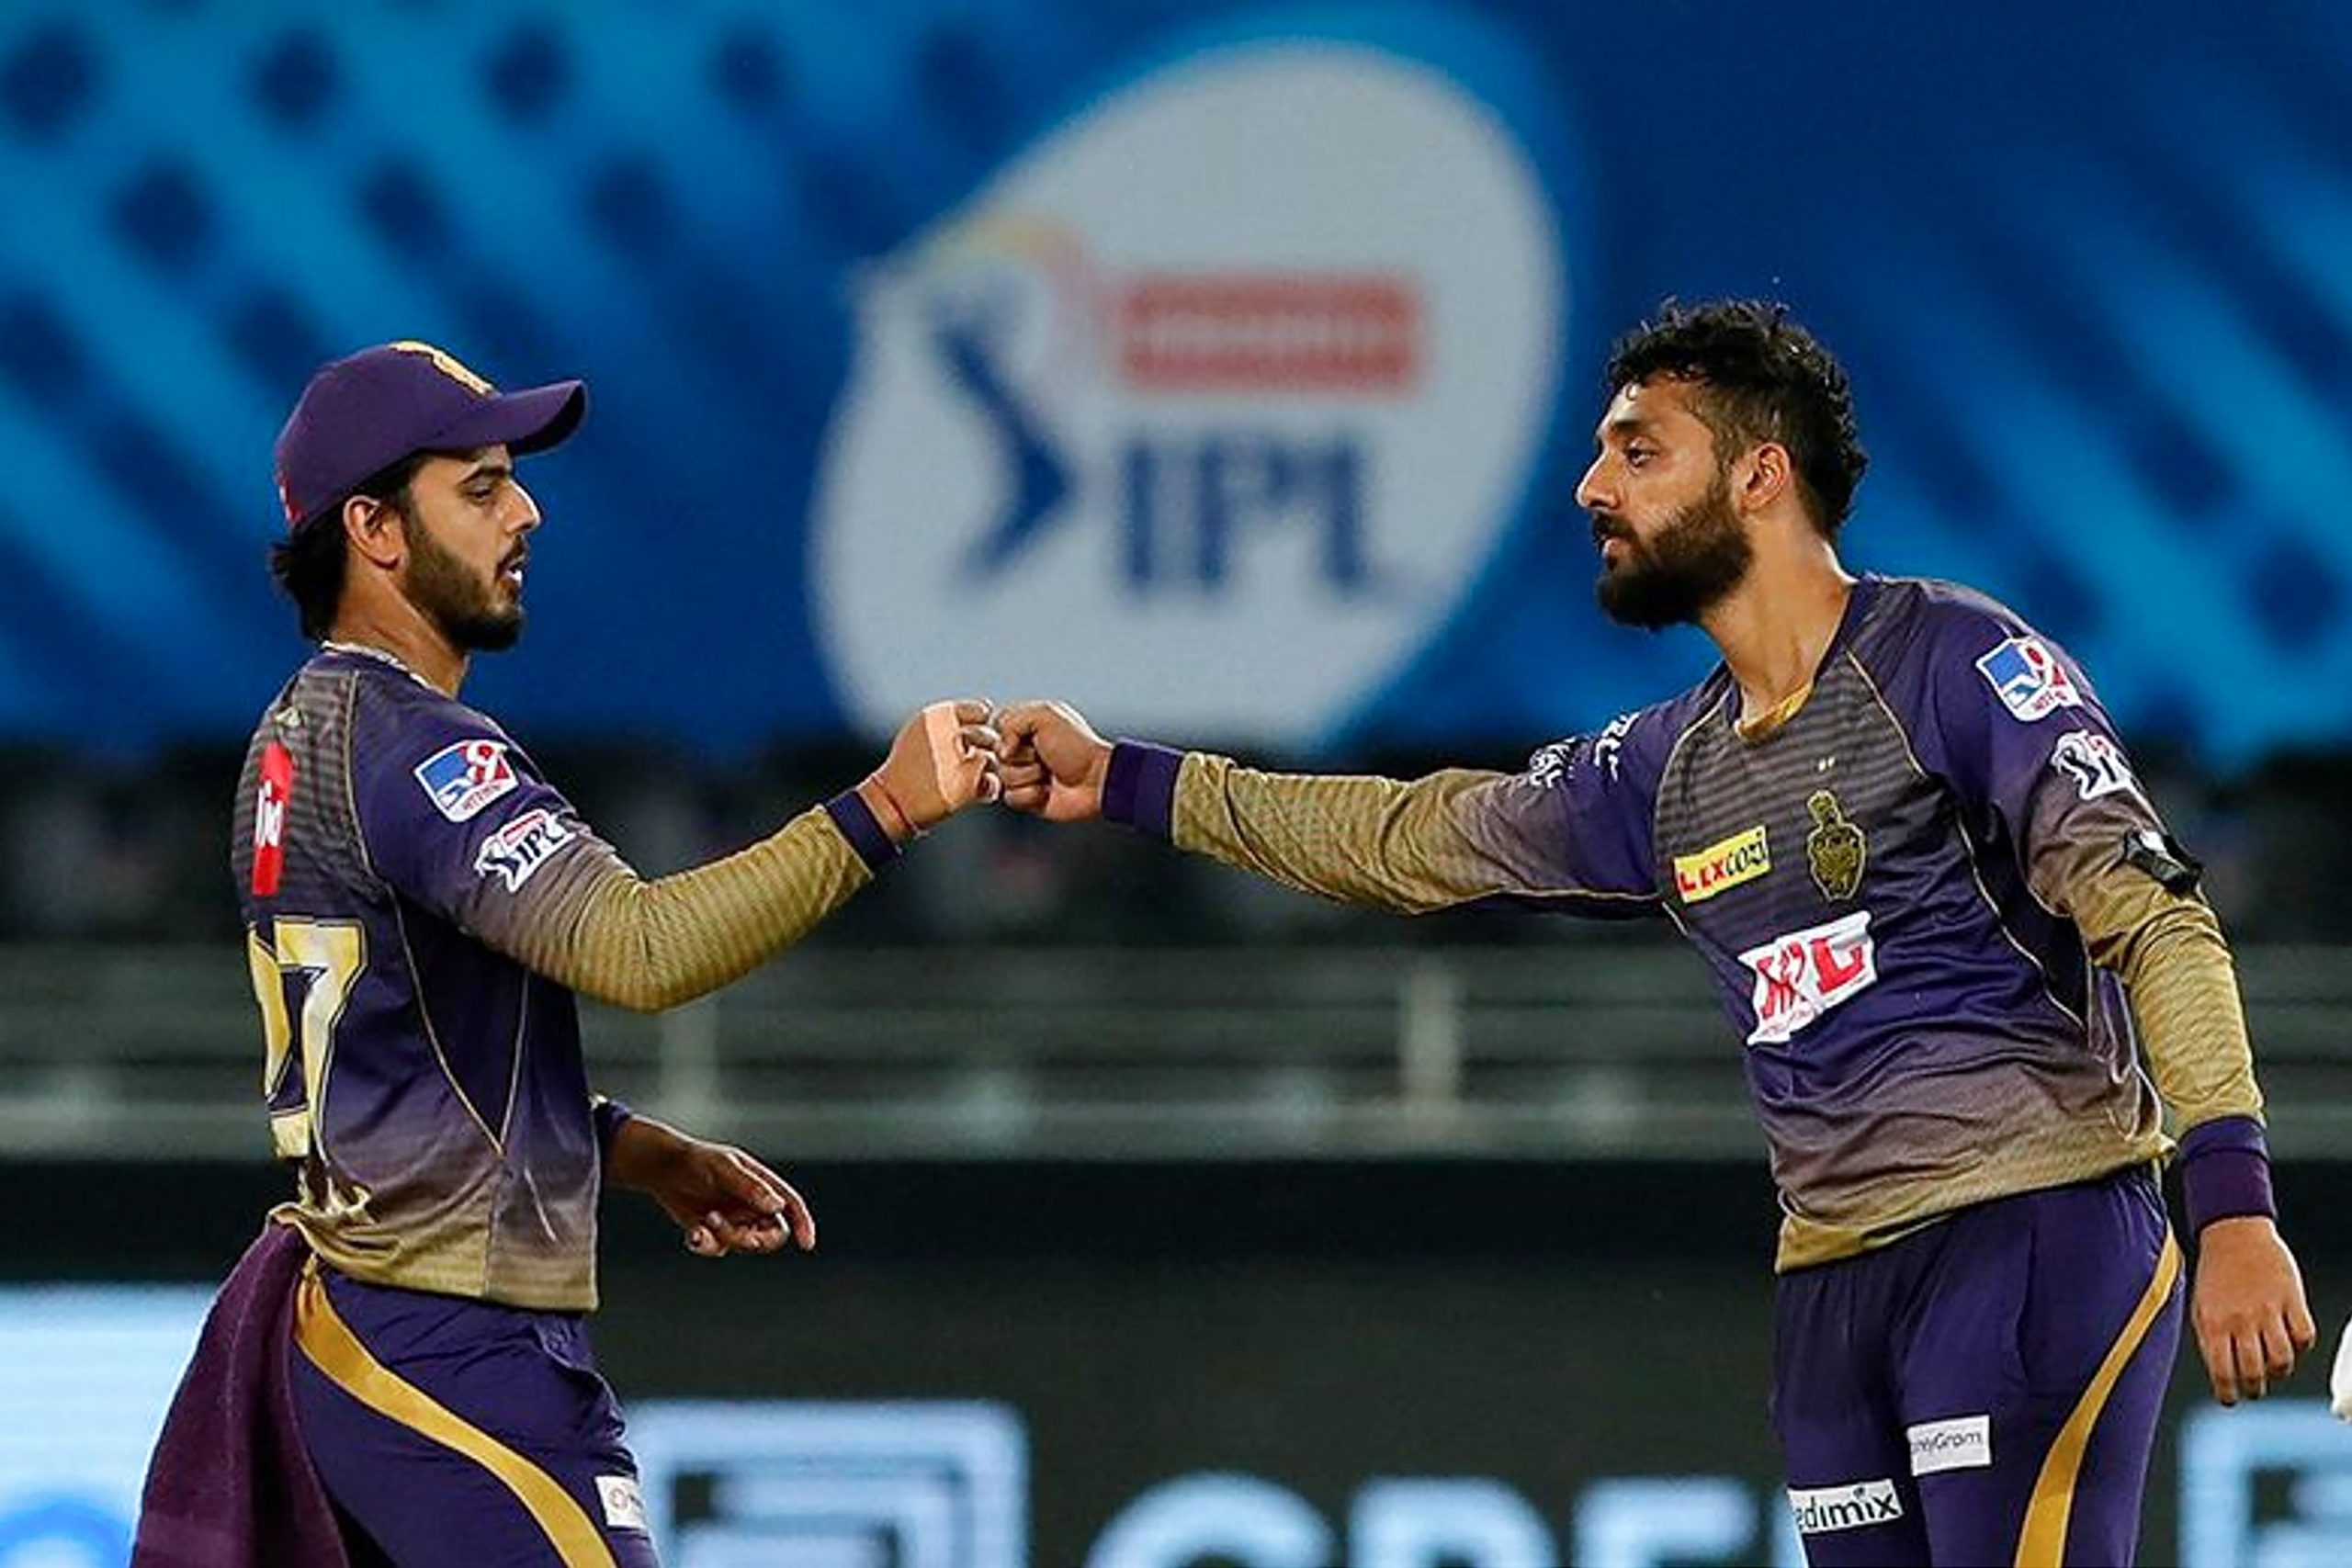 KKR%20vs%20RCB%3A%20Is%20today%27s%20IPL%20match%20cancelled%3F